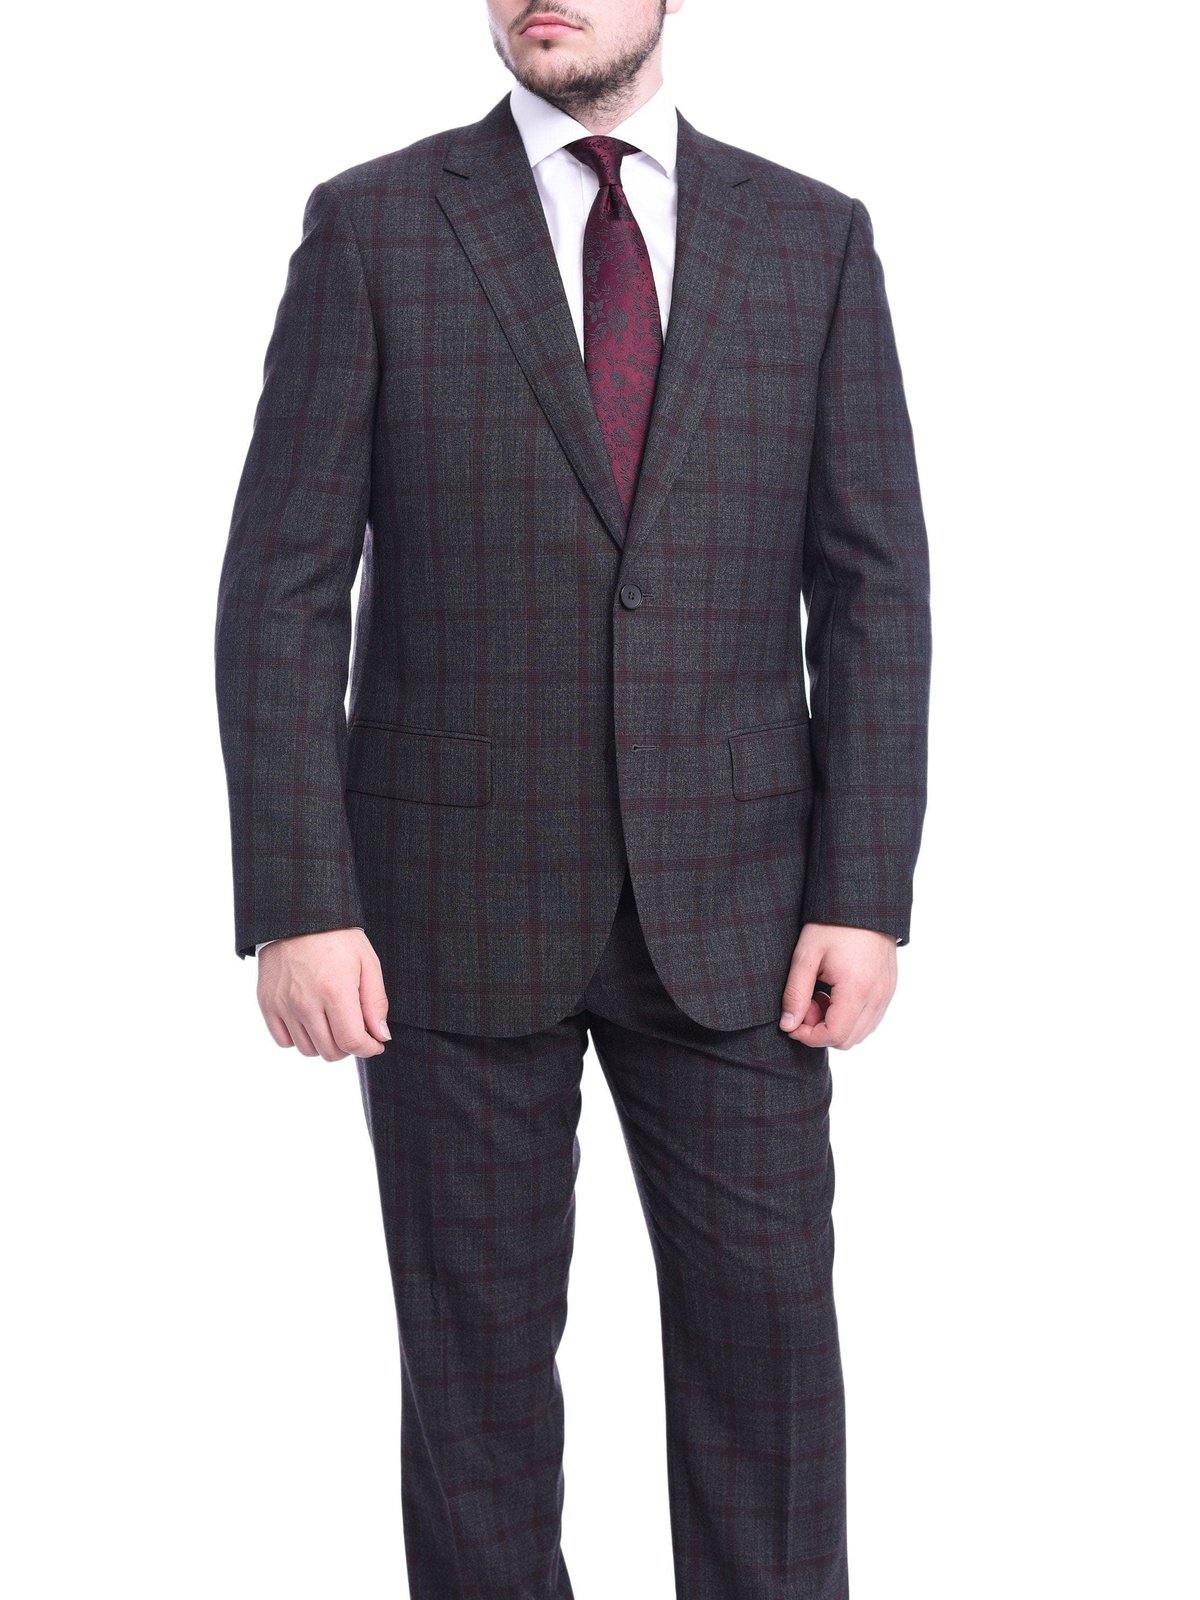 Napoli Sale Suits Napoli Classic Fit Gray &amp; Red Glen Plaid Half Canvassed Super 150s Wool Suit